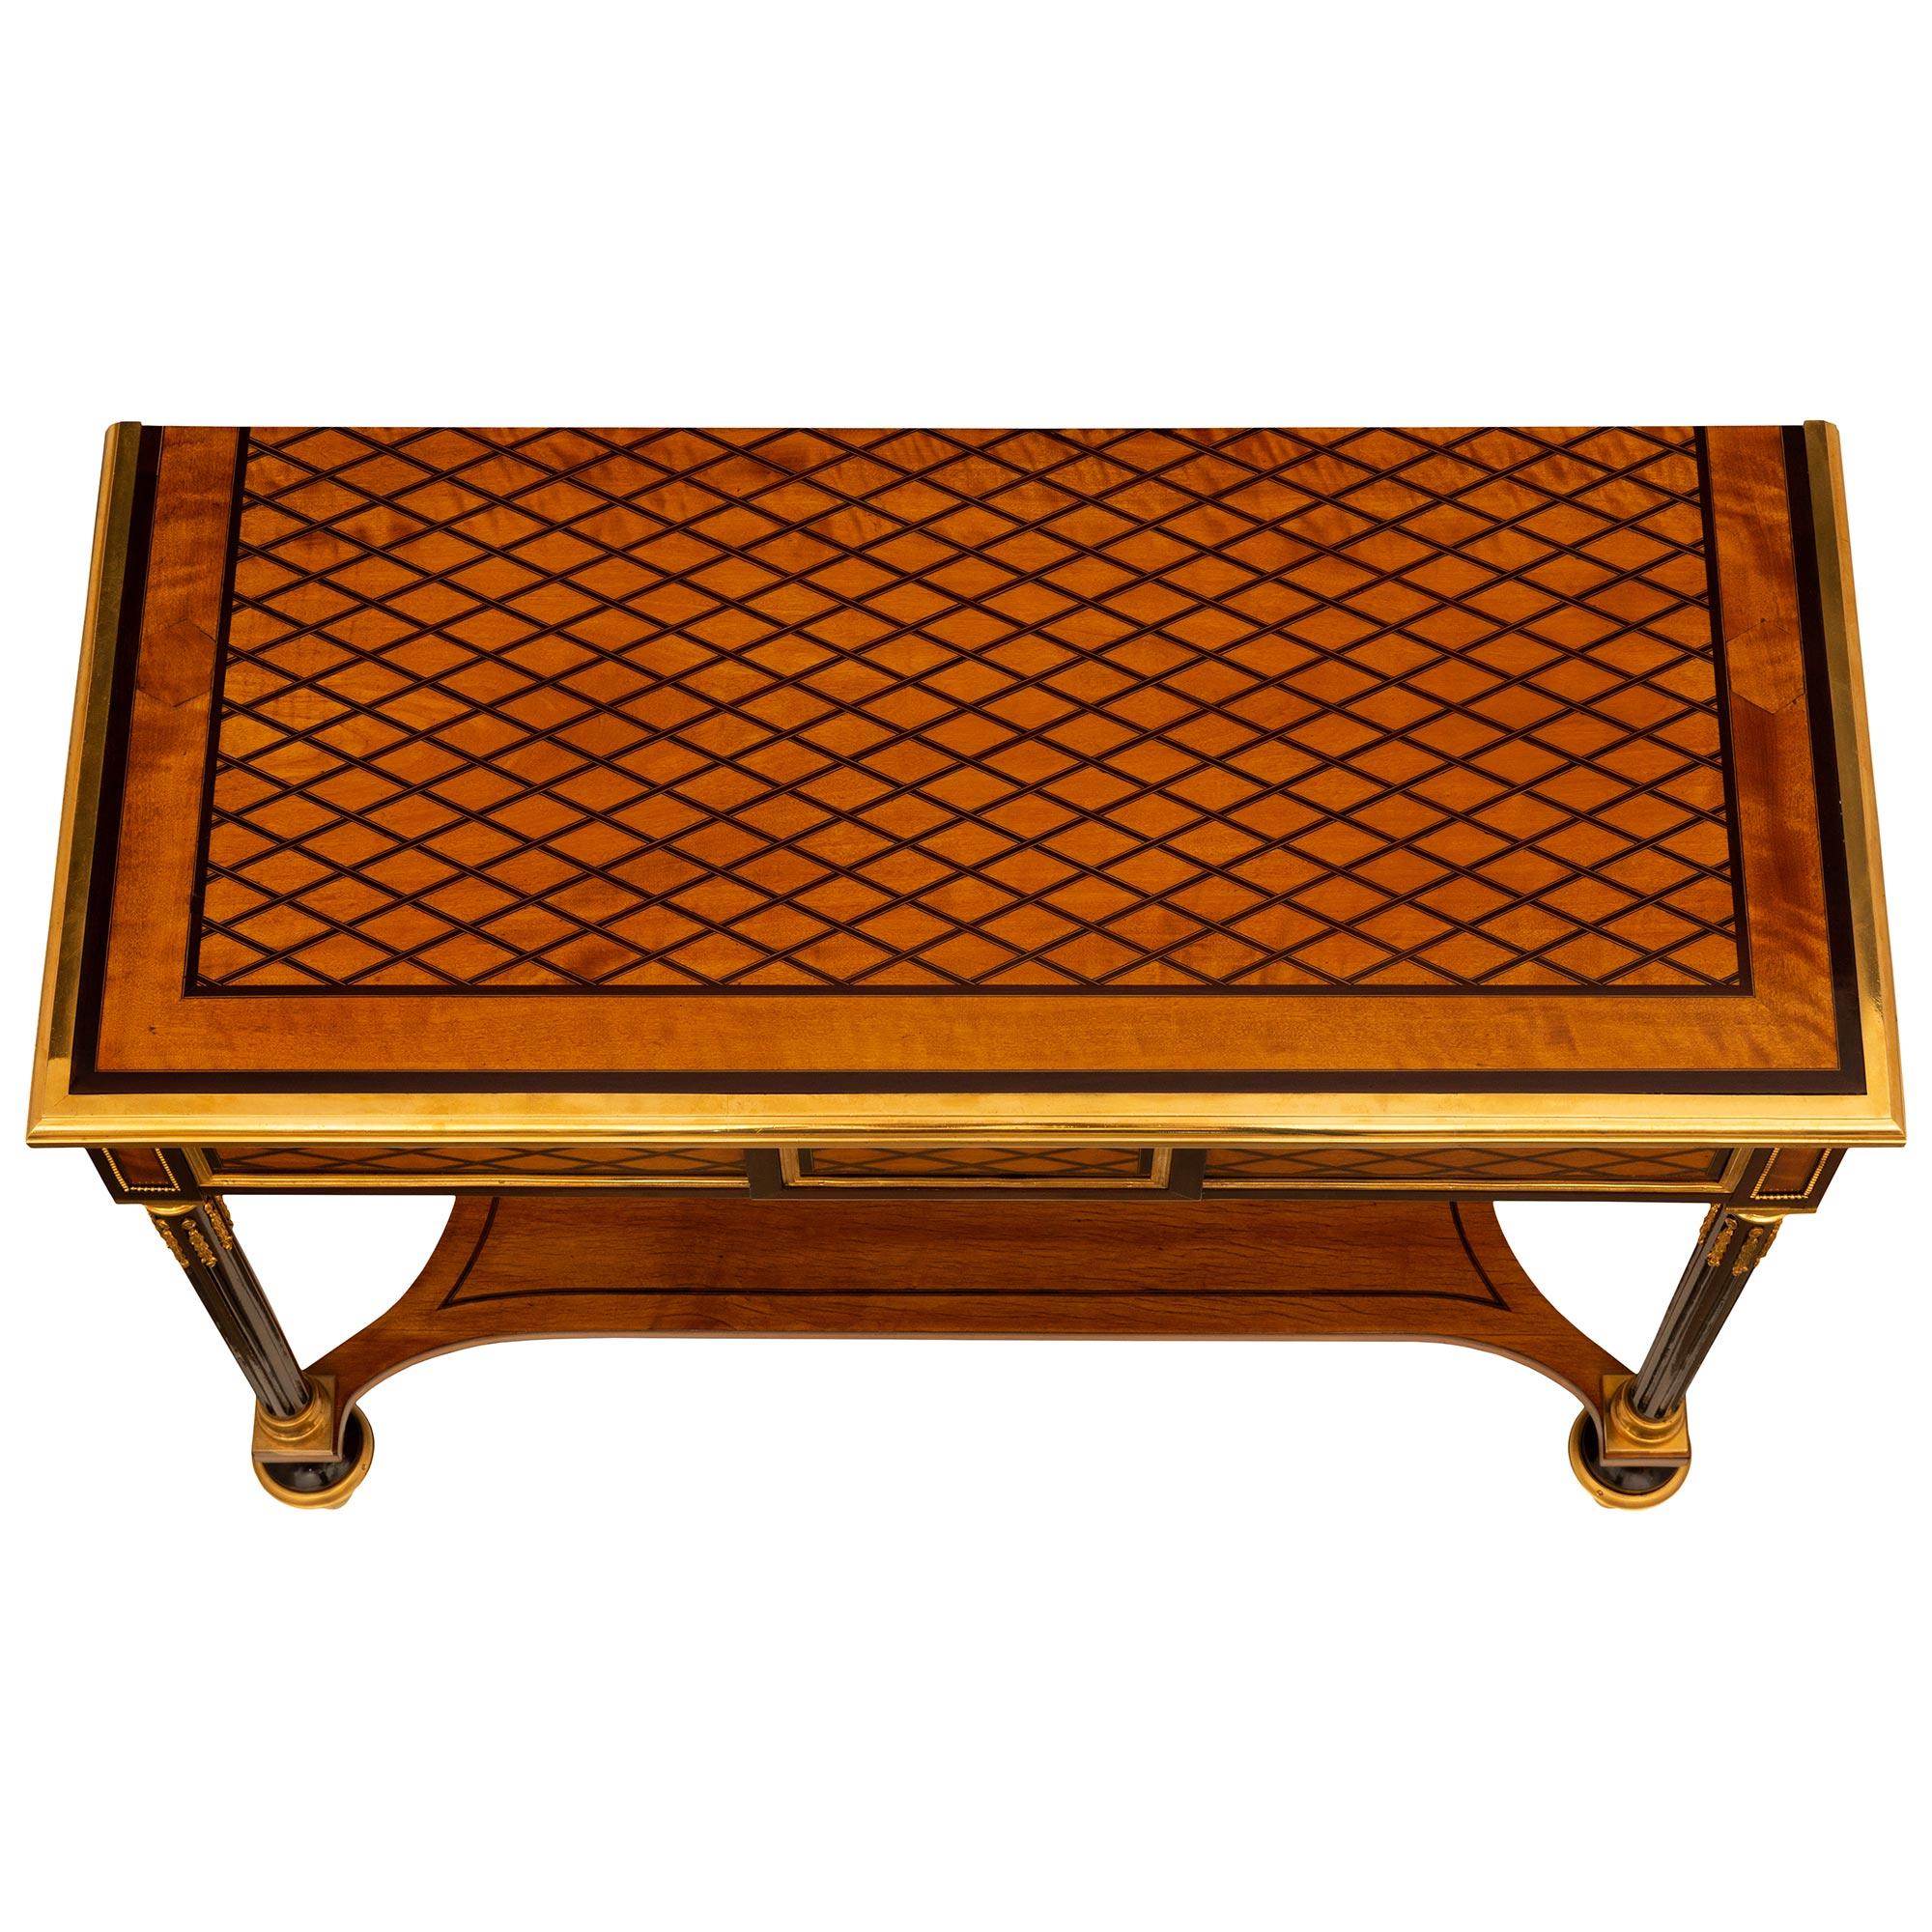 A stunning French 19th century Louis XVI st. Satinwood, Mahogany and Ormolu console. The beautiful freestanding console is raised on elegant topie shaped Mahogany feet with circular Ormolu sabots. Each leg is connected by a wonderful Satinwood